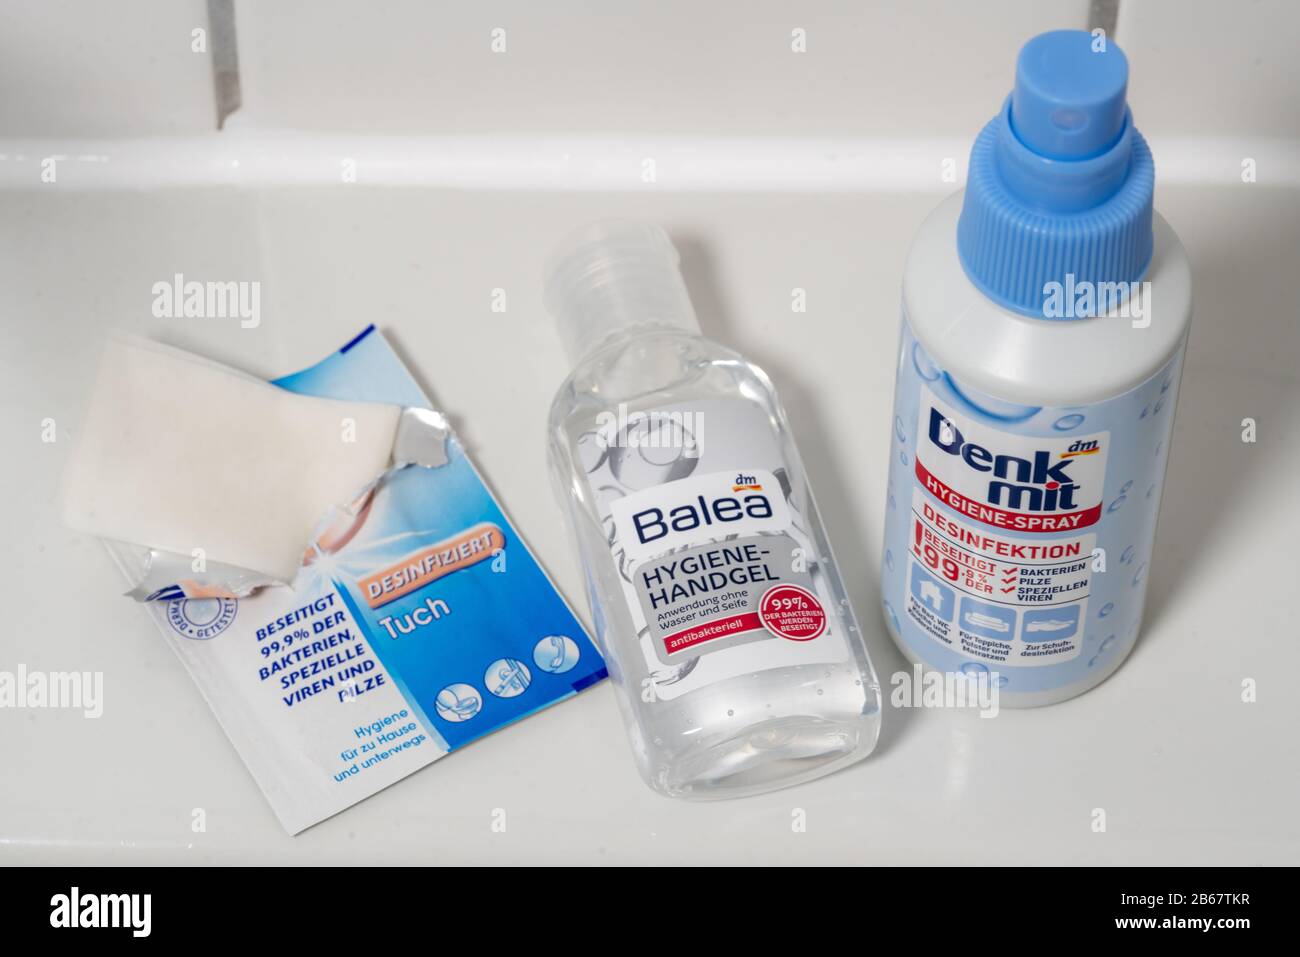 Domestic hygiene, washing hands, hygiene hand gel, disinfection spray, disinfection cloth, Stock Photo